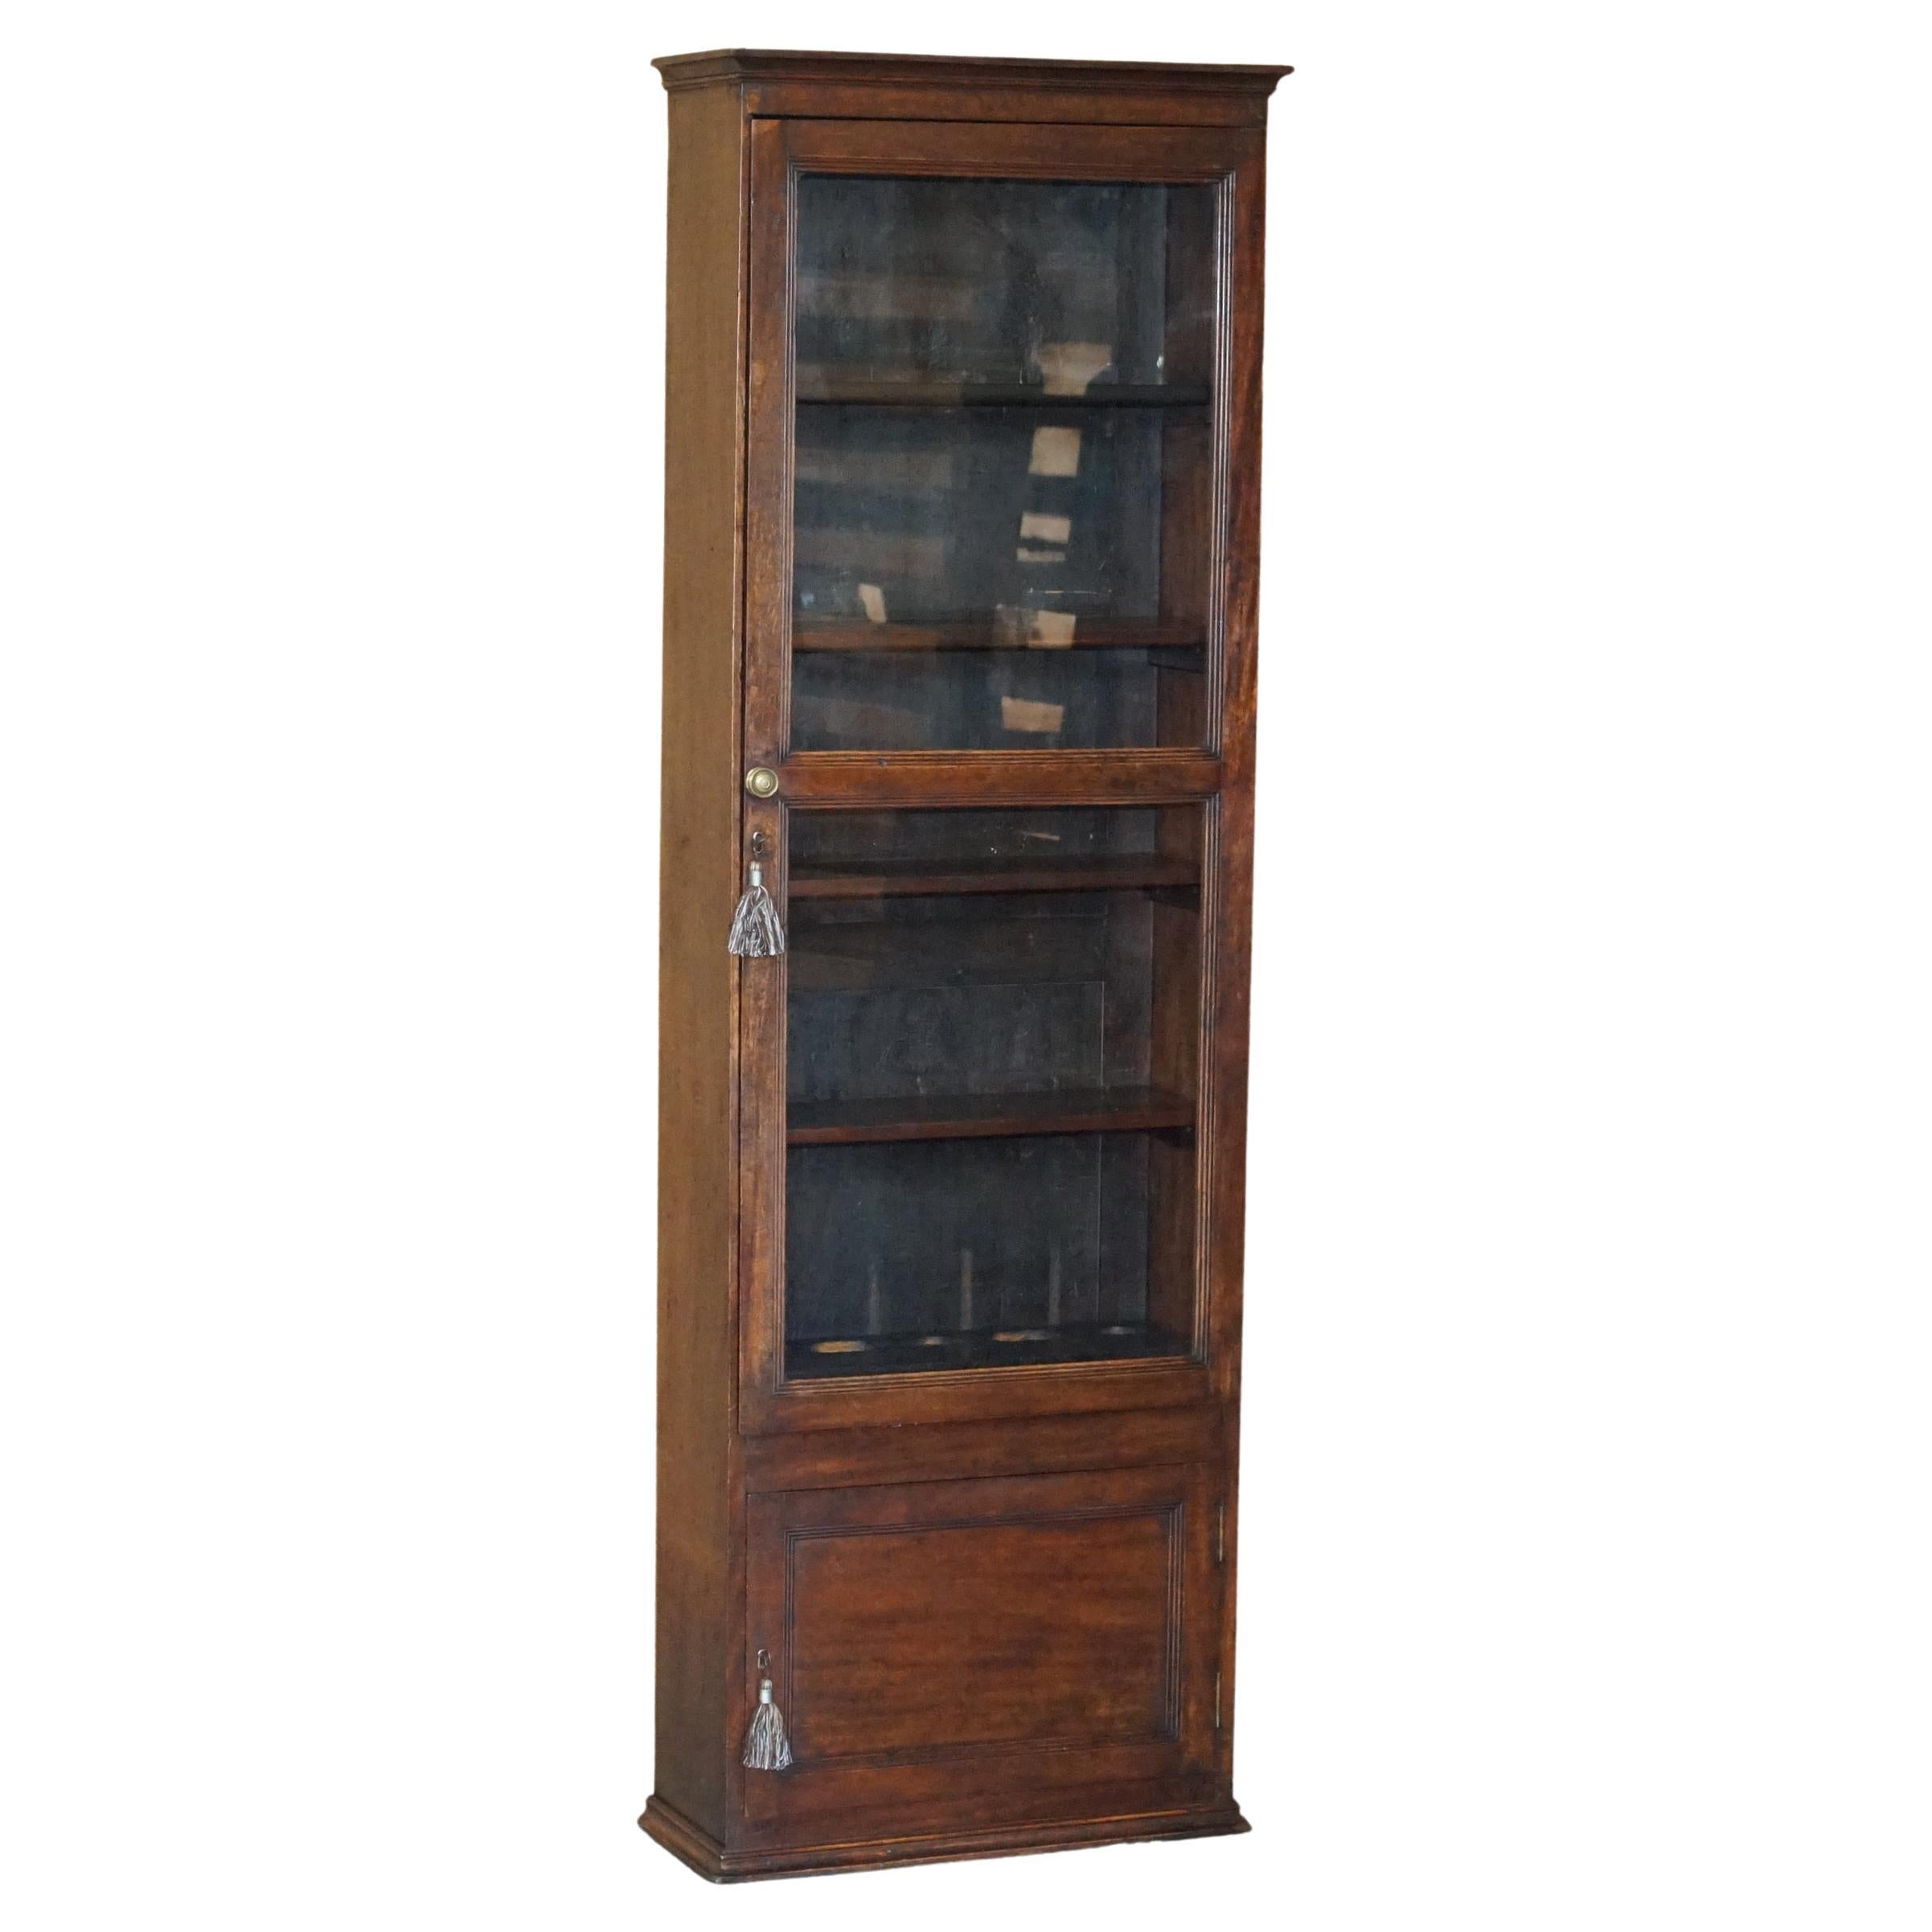 Antique Victorian Hardwood Gun Case or Cupboard Converted into Library Bookcase